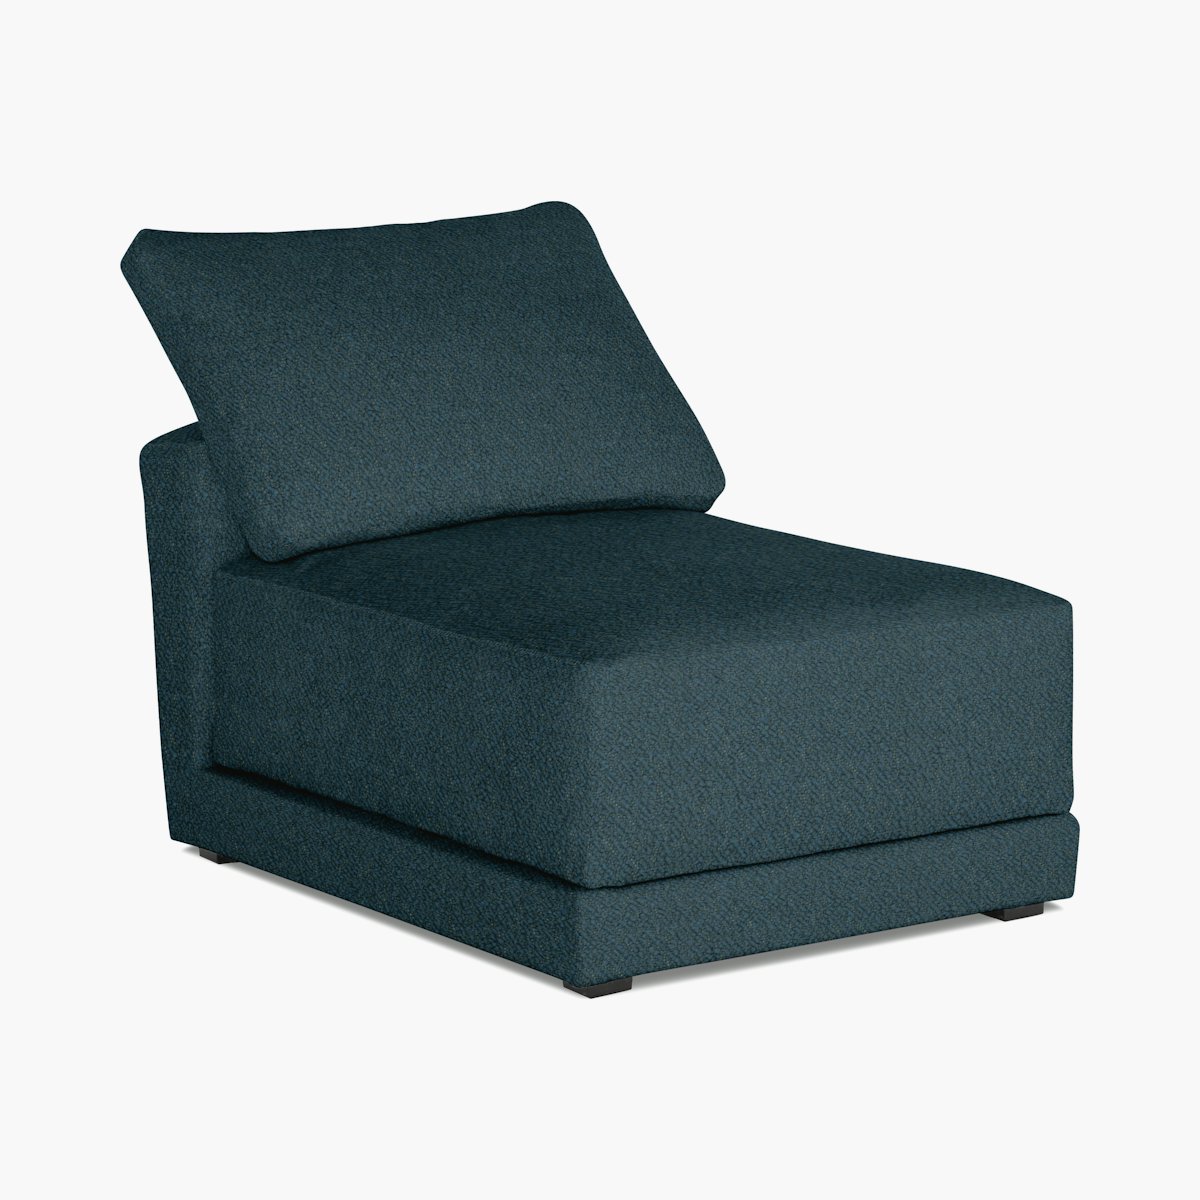 Mags Lounge Single Seater